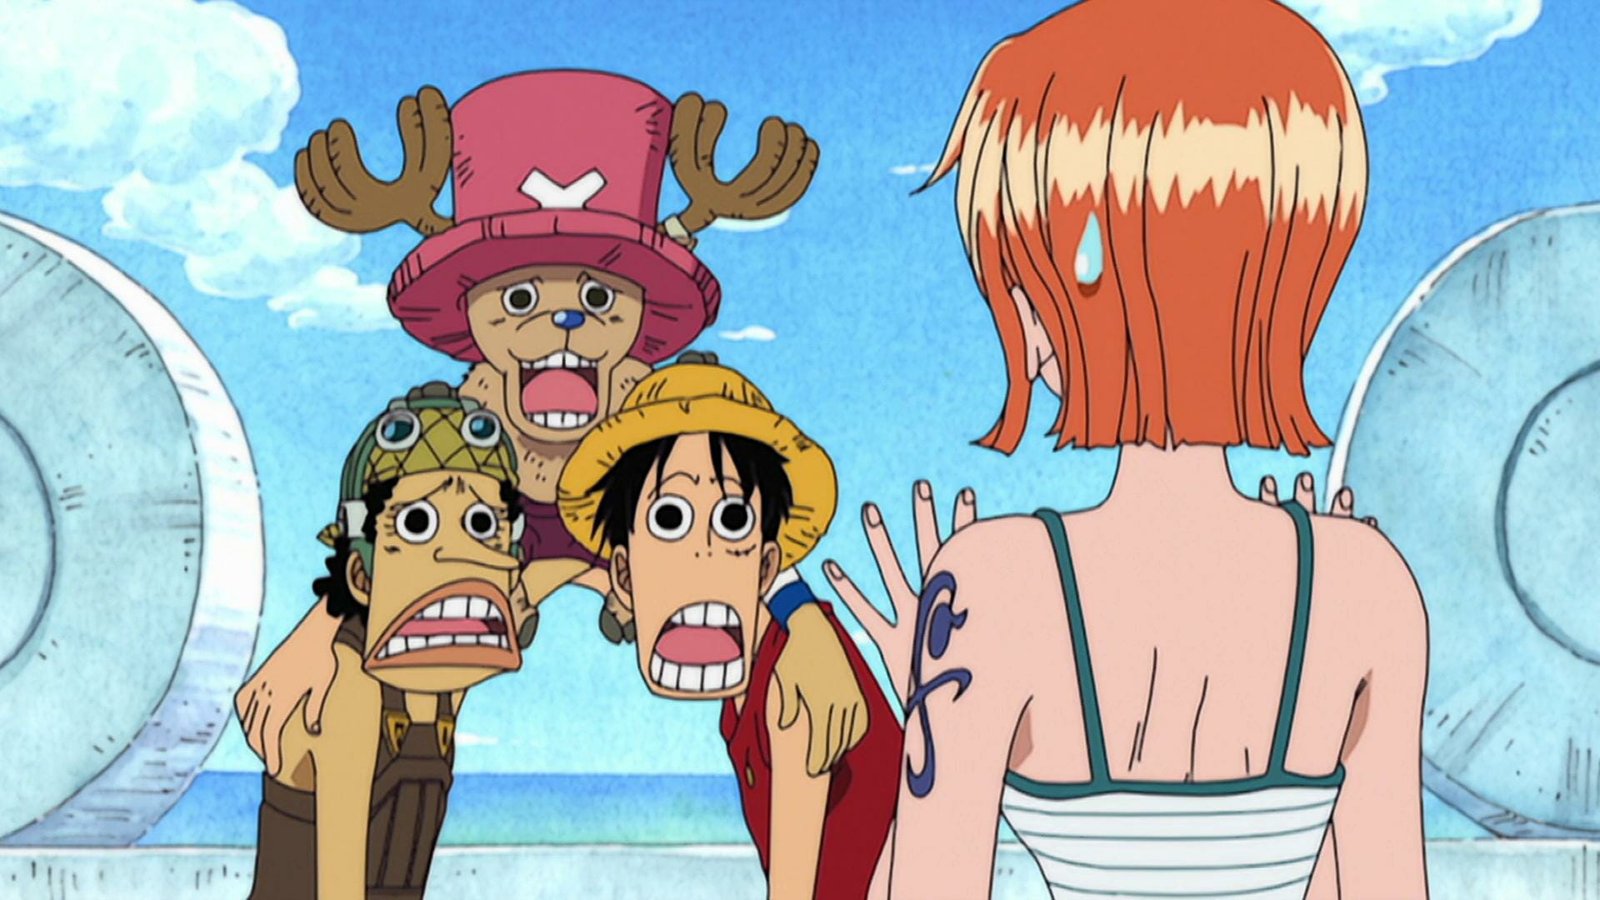 11. Chopper and Milky